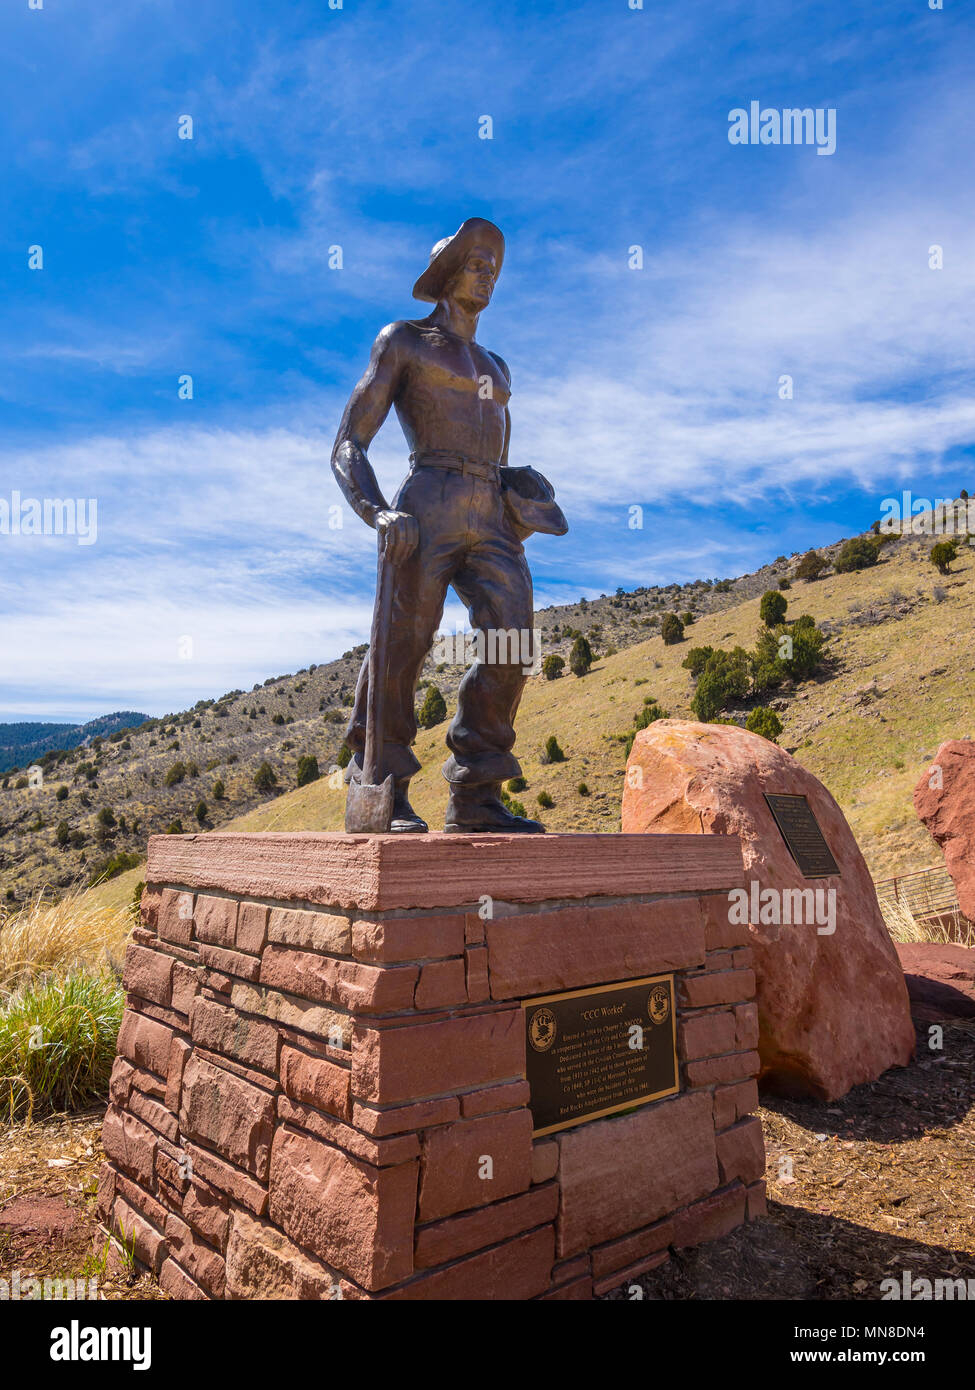 Bronze statue of 'CCC Worker' at Red Rocks Amphitheatre, Colorado, USA. Stock Photo